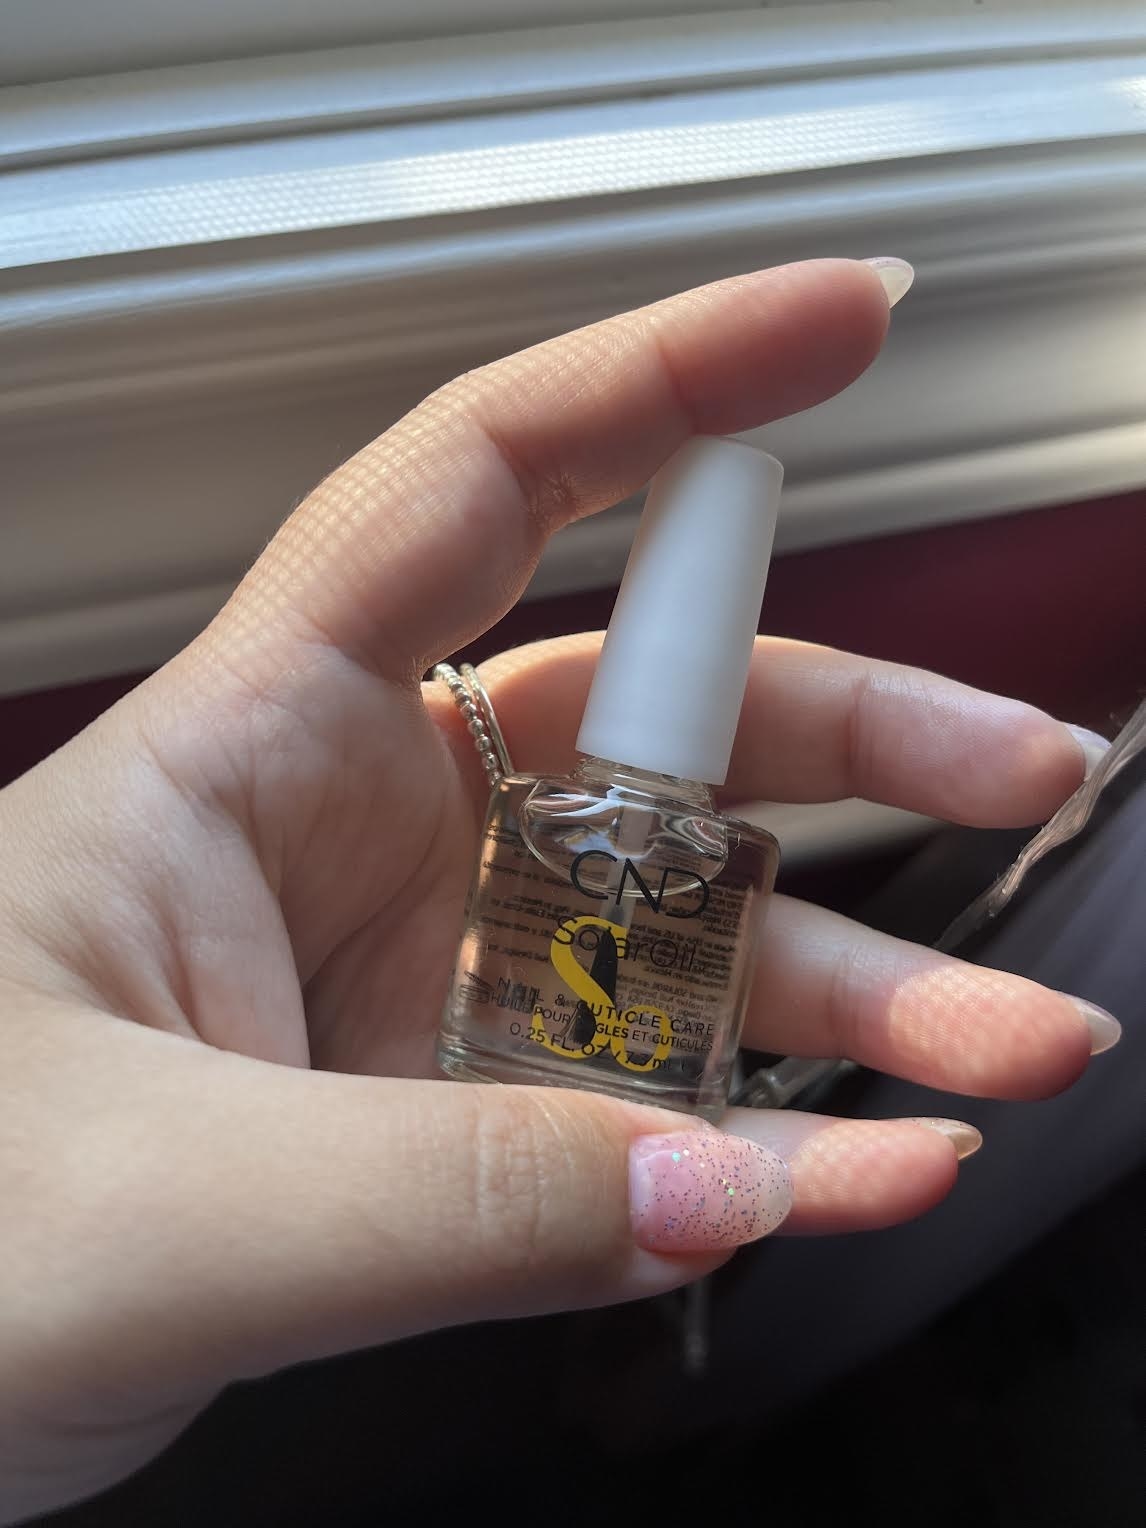 Bianca holding up the cuticle oil in front of a window